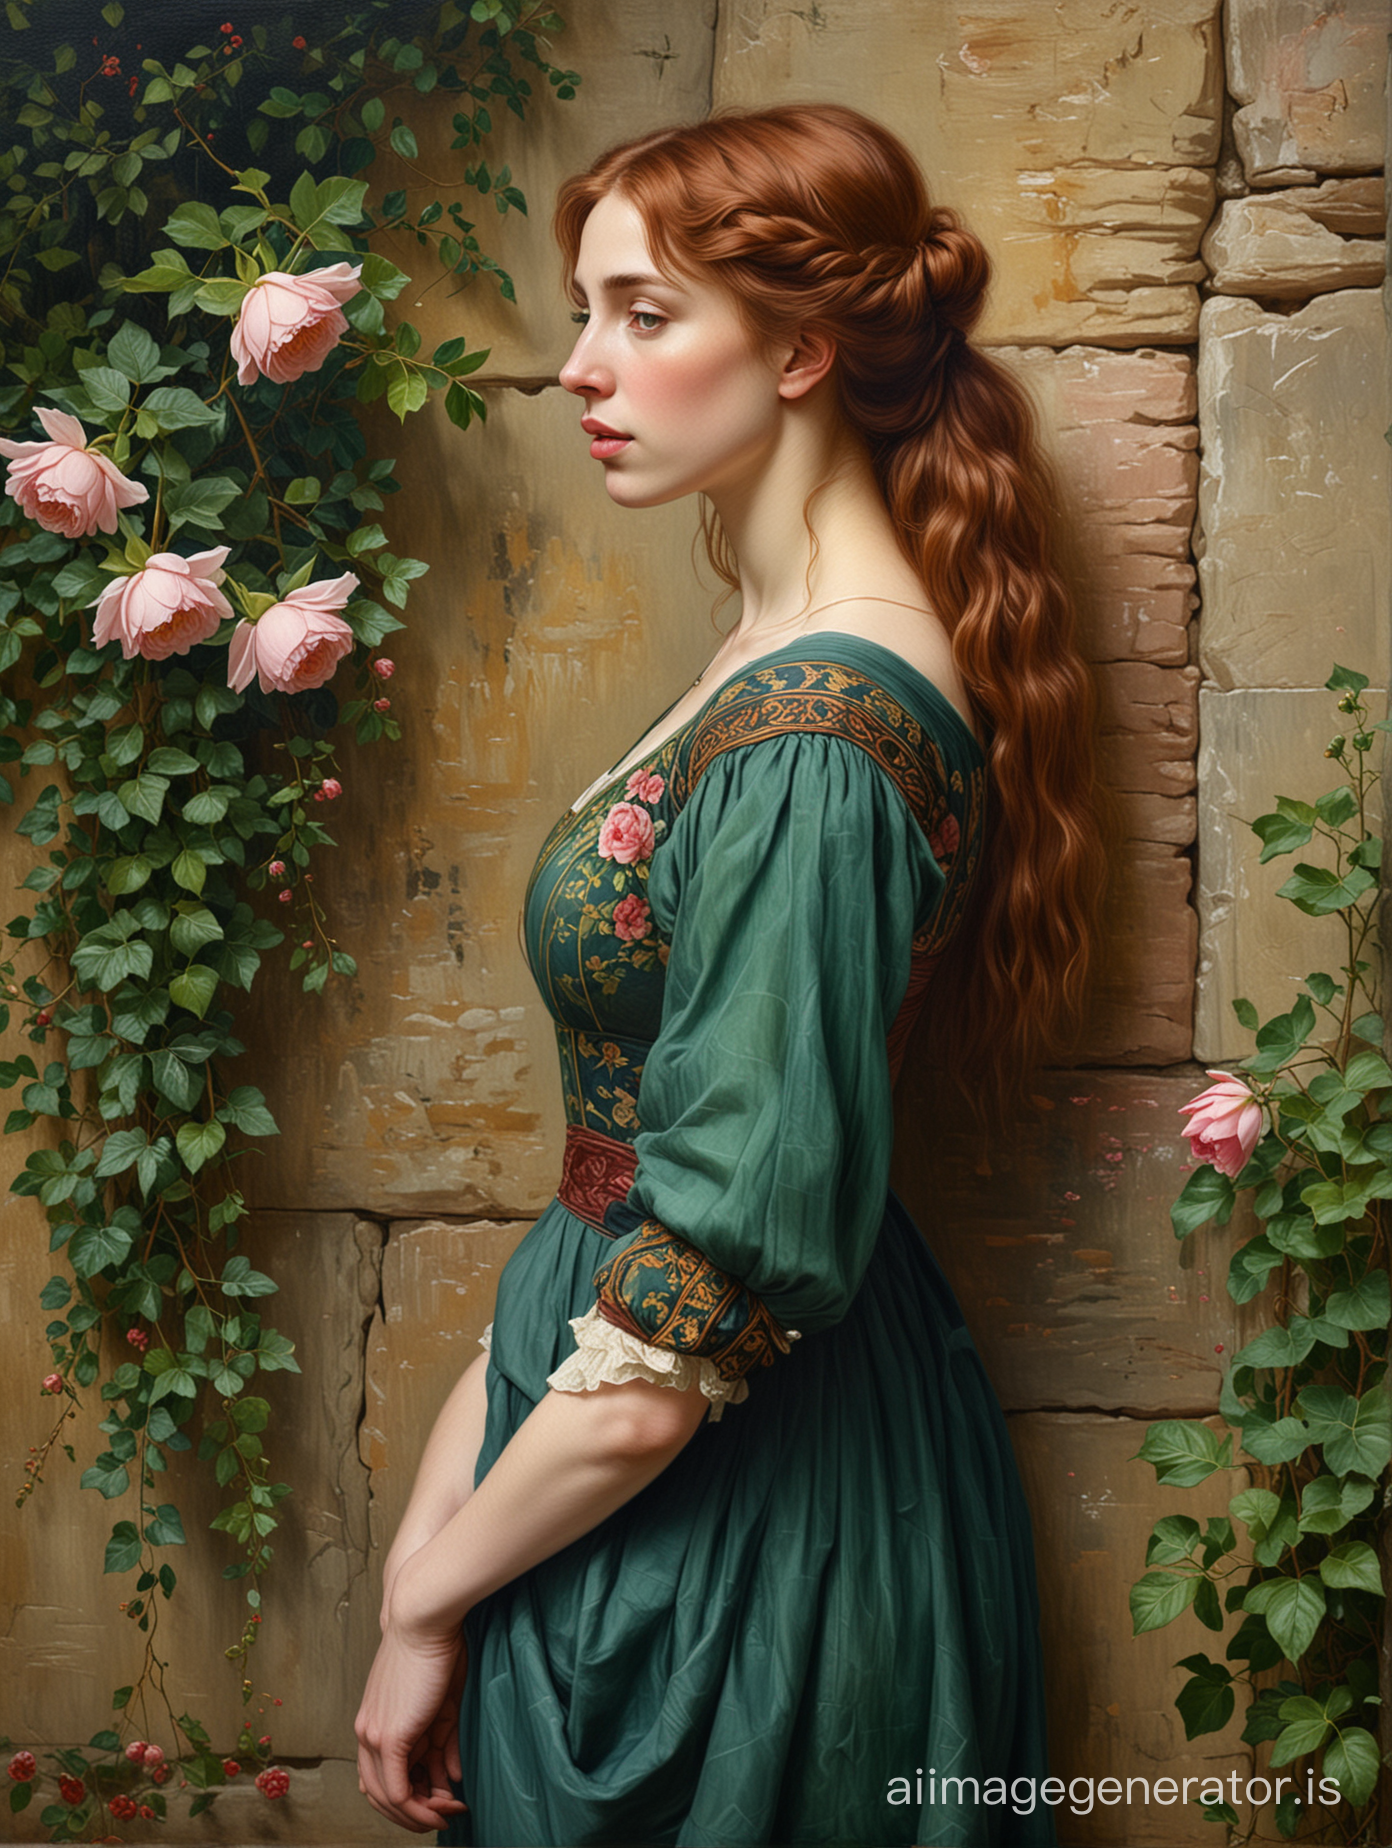 Pre-Raphaelite painting, full-length woman 40 years old, standing against a natural stone wall covered with hedera and roses, diagonal angle, red wavy hair tied in a bun at the back of her head, dark green loose dress made of heavy green fabric with a blue pattern without a belt, a woman holds a pale pink flower in one hand and smells it, soft, warm, diffused light, emphasizing the texture of the fabric and large facial features, thick lips, canvas, oil, brush strokes, texture, golden ratio, style of the artist Waterhouse